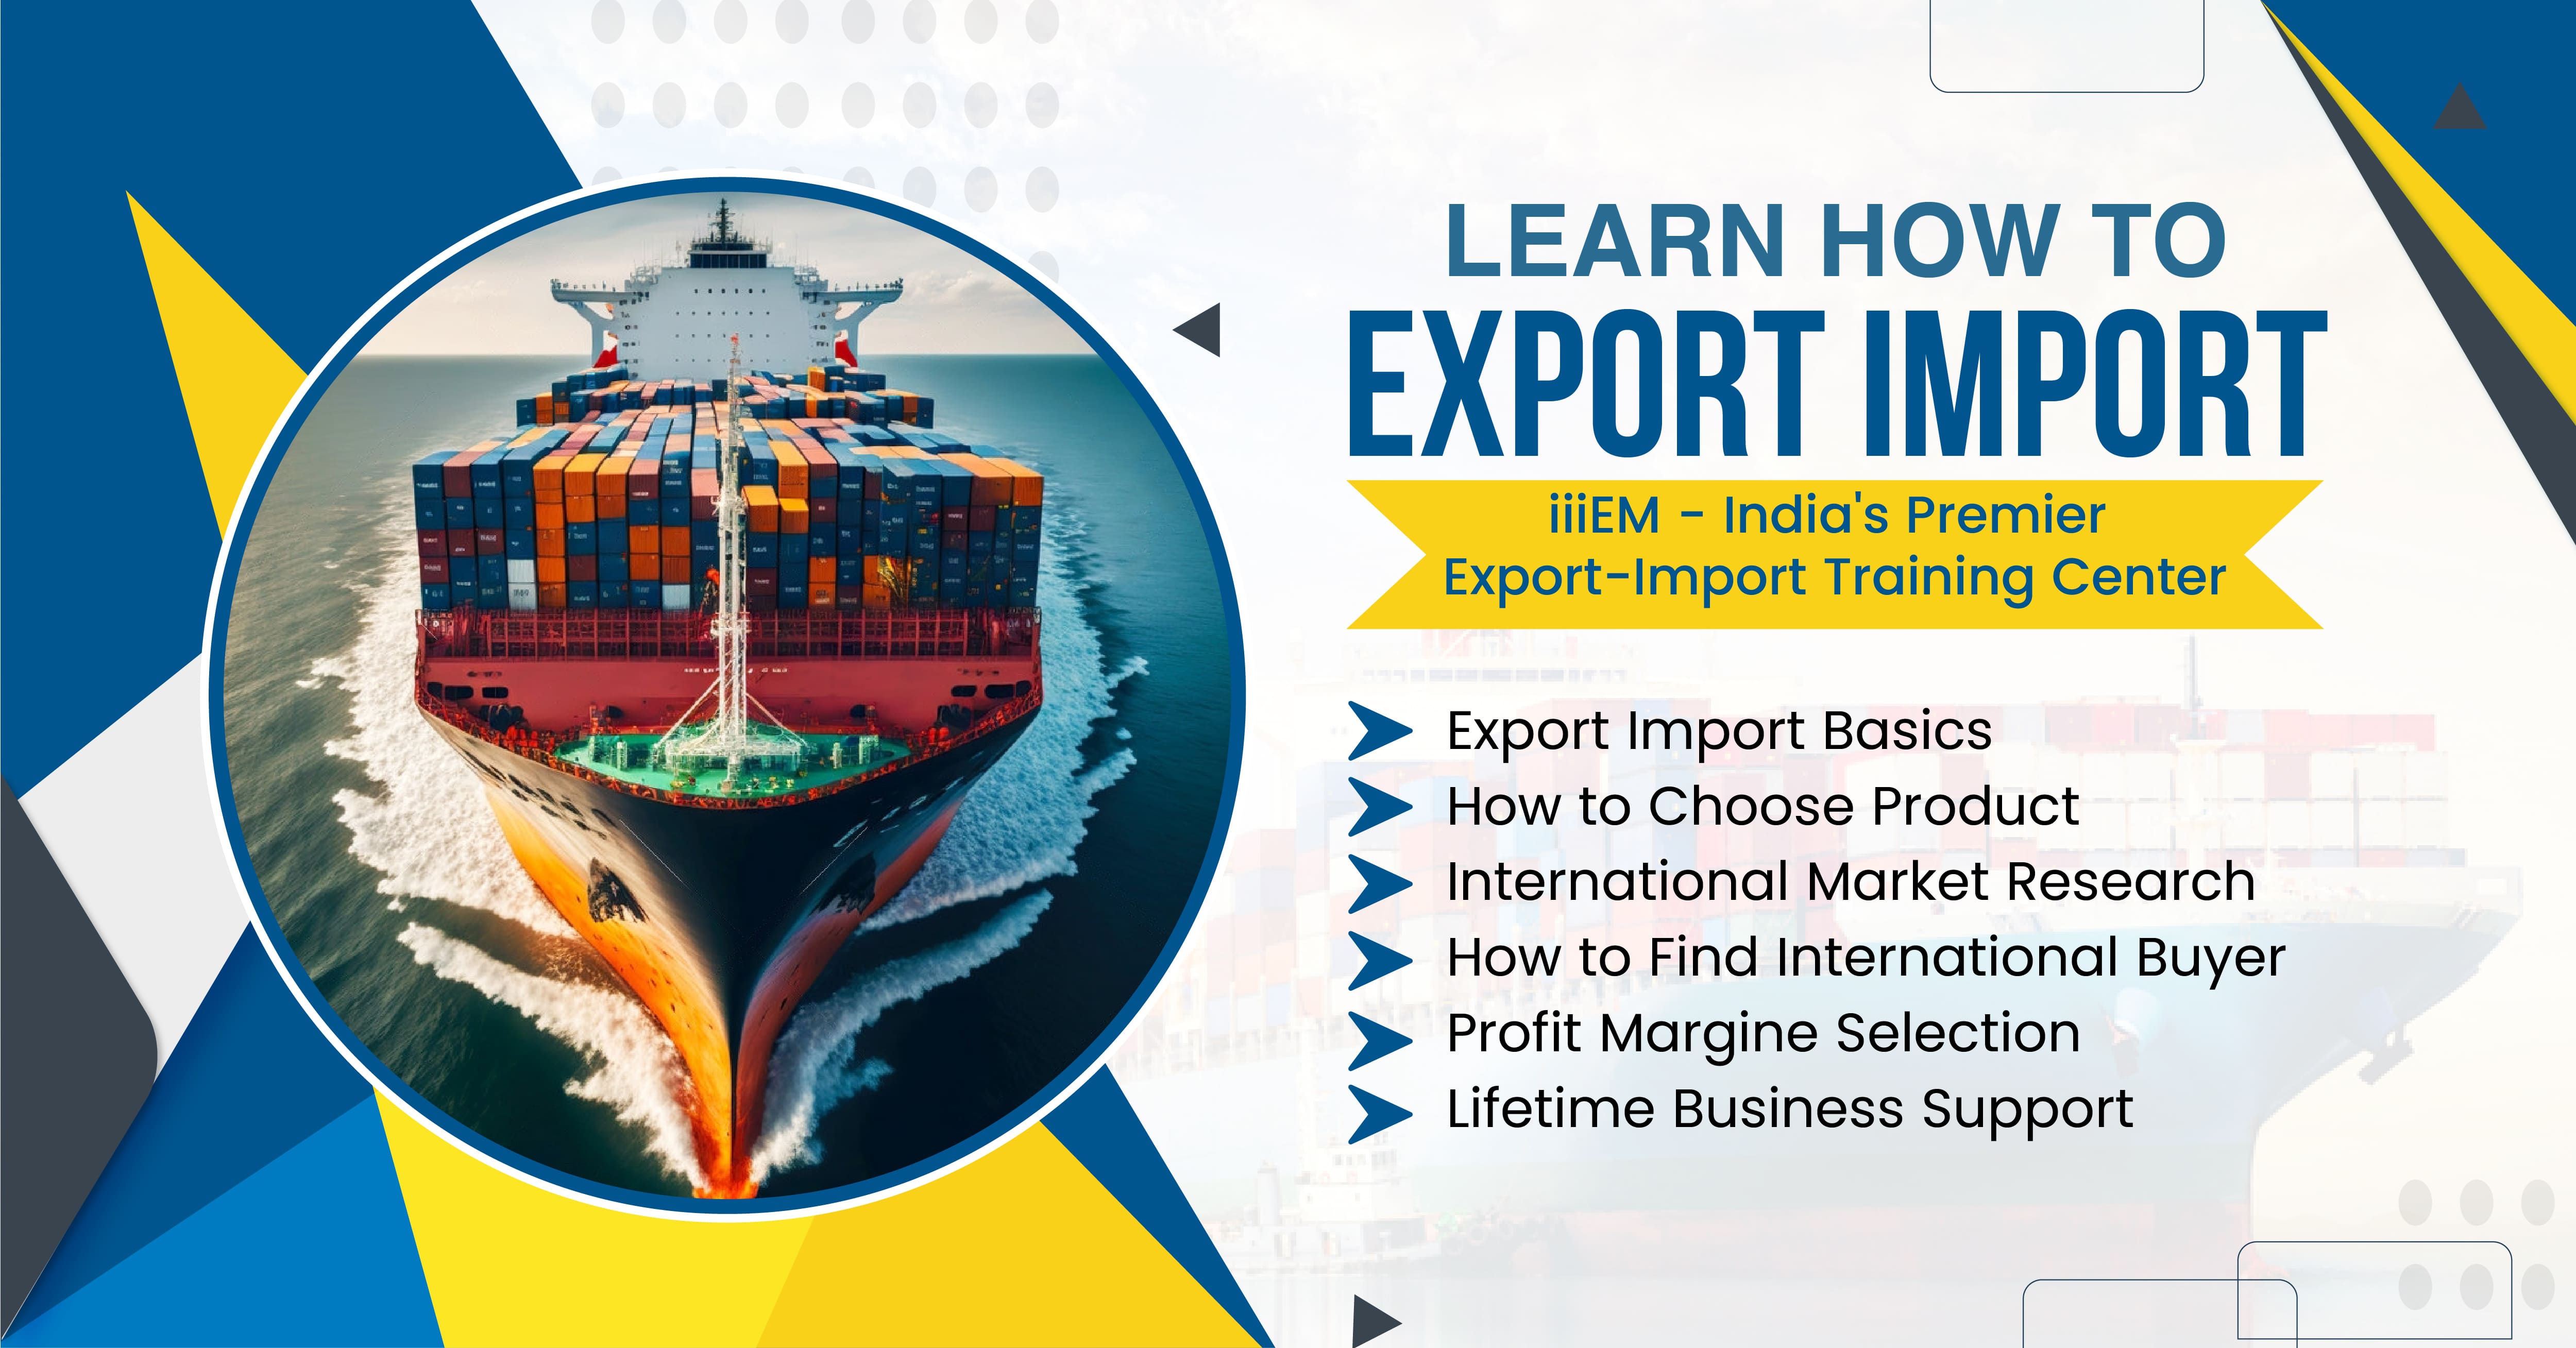 Know the Secrets to Successful Export Import Business in Hyderabad, Hyderabad, Telangana, India